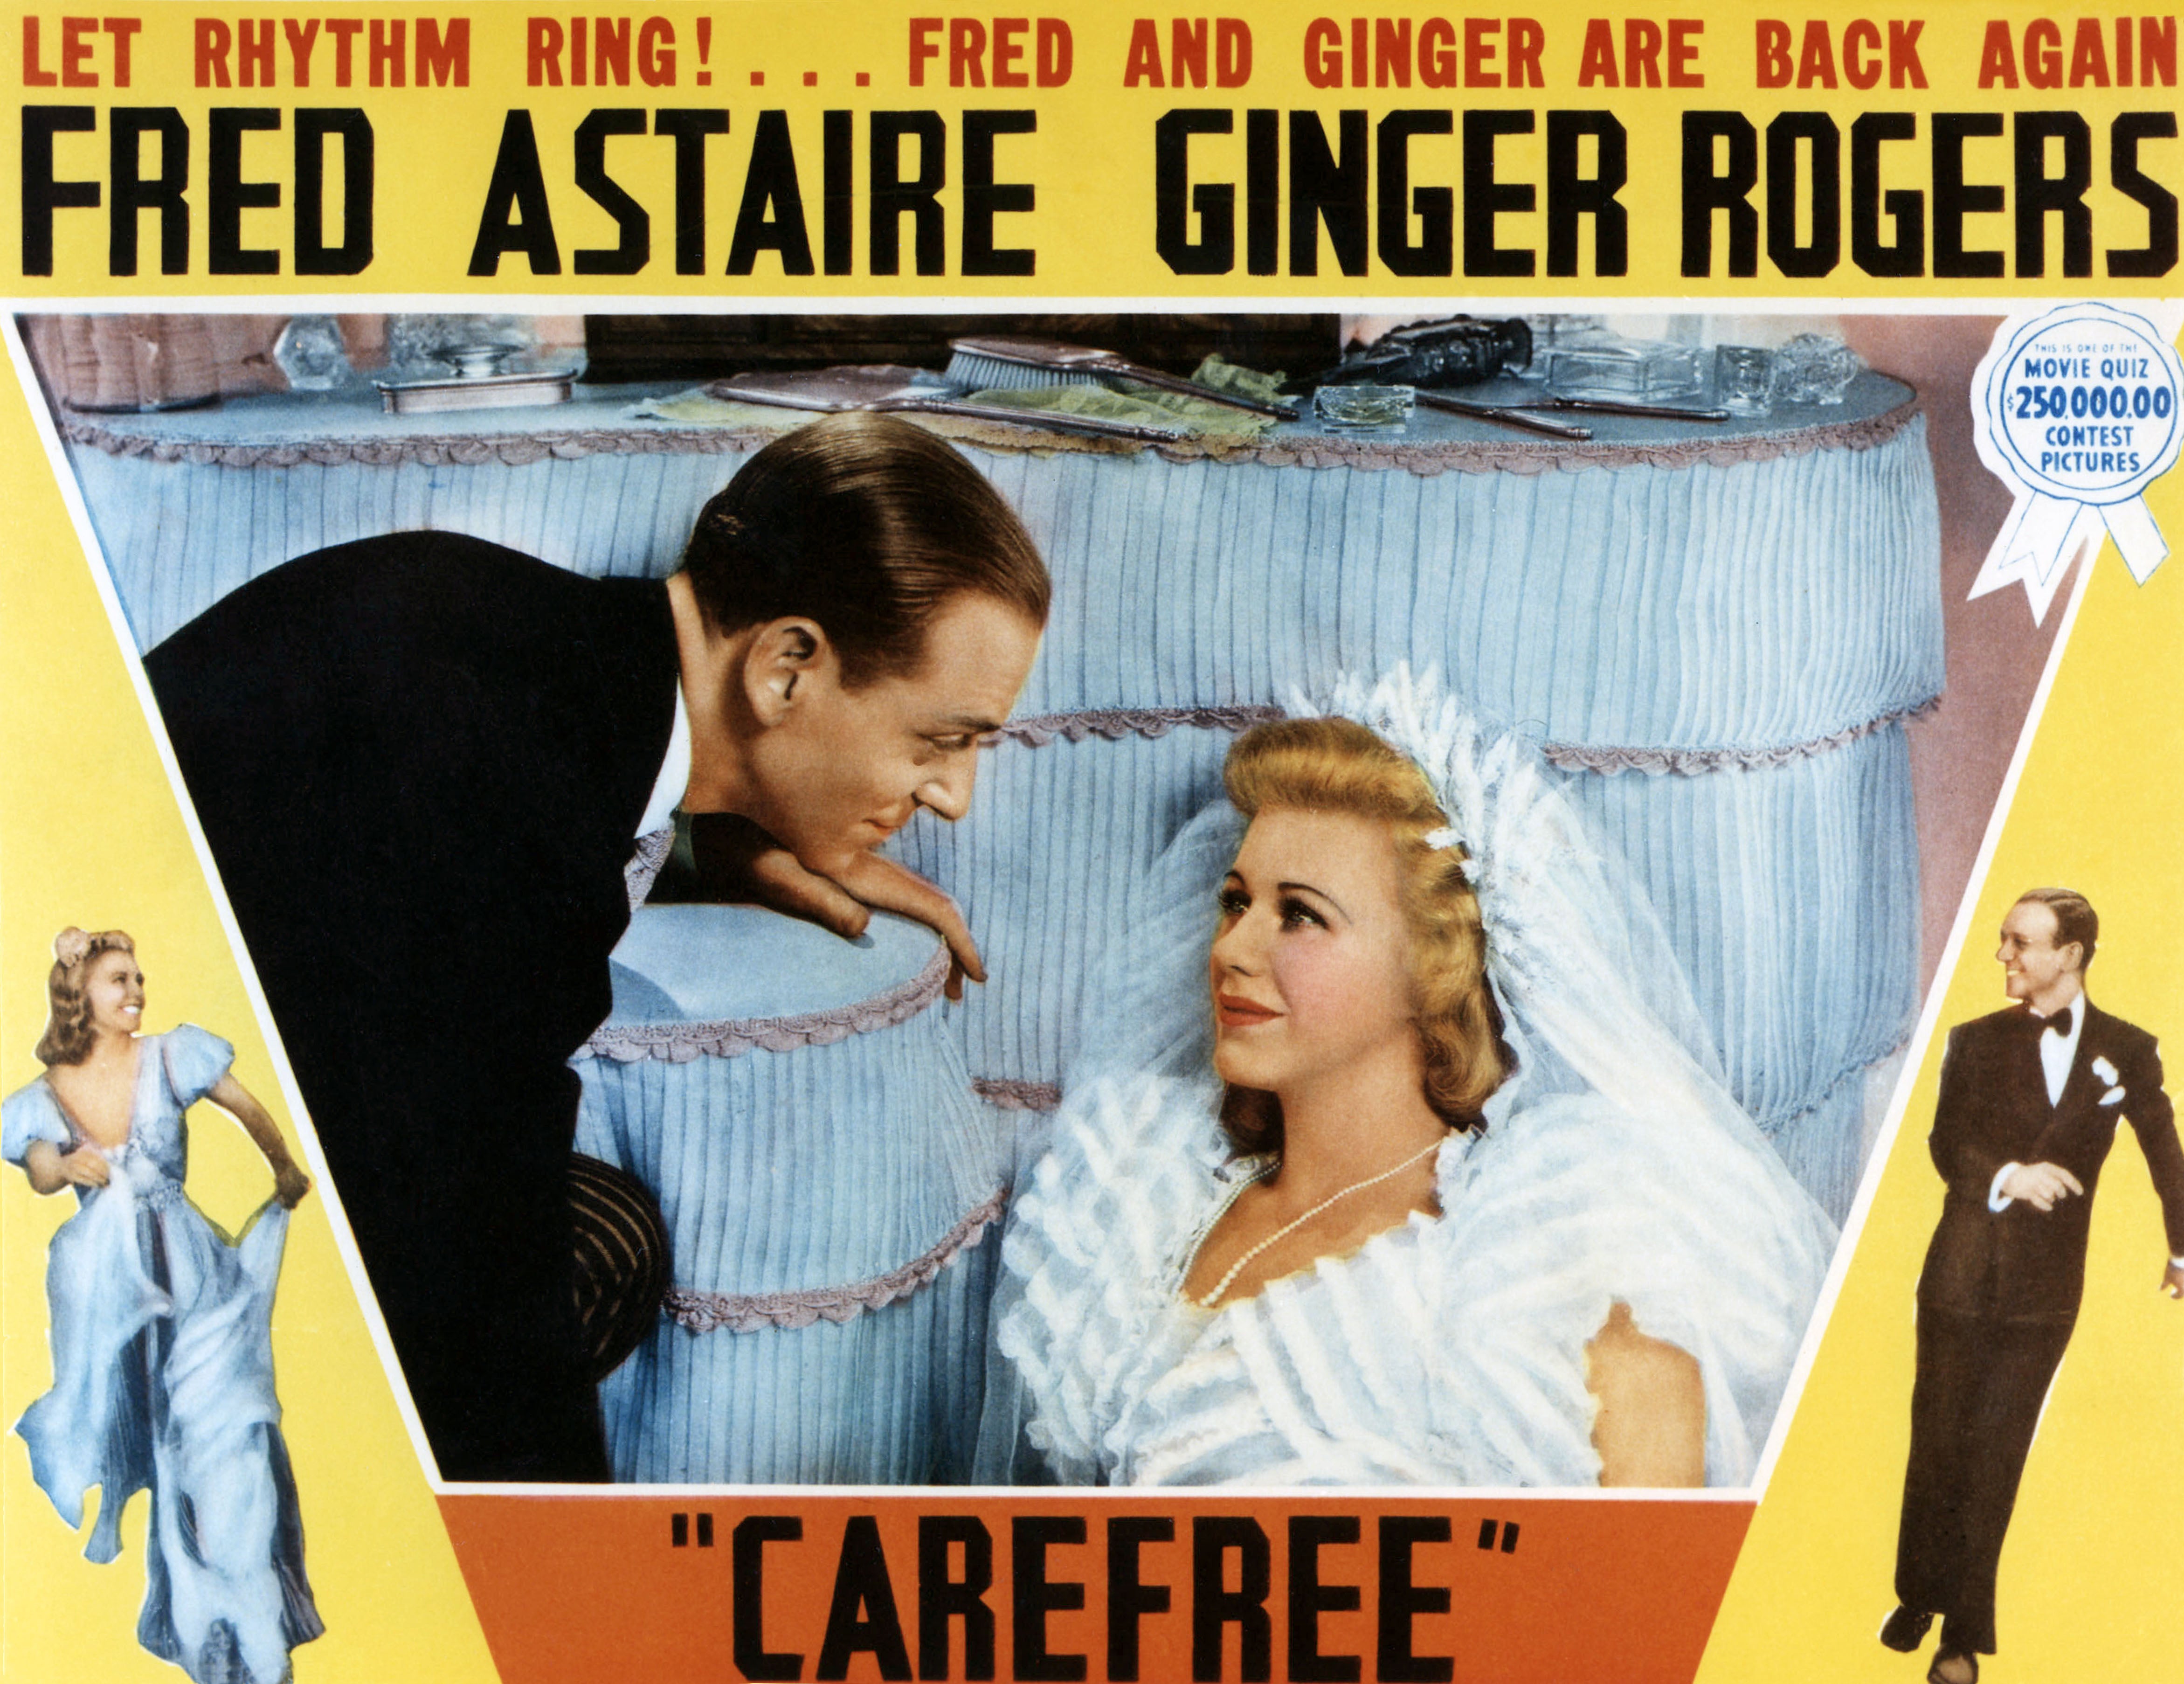 The couple’s musicals are so cherished that the sometimes troubling sexual politics?in the films?like ‘Carefree’ in 1938 are overlooked